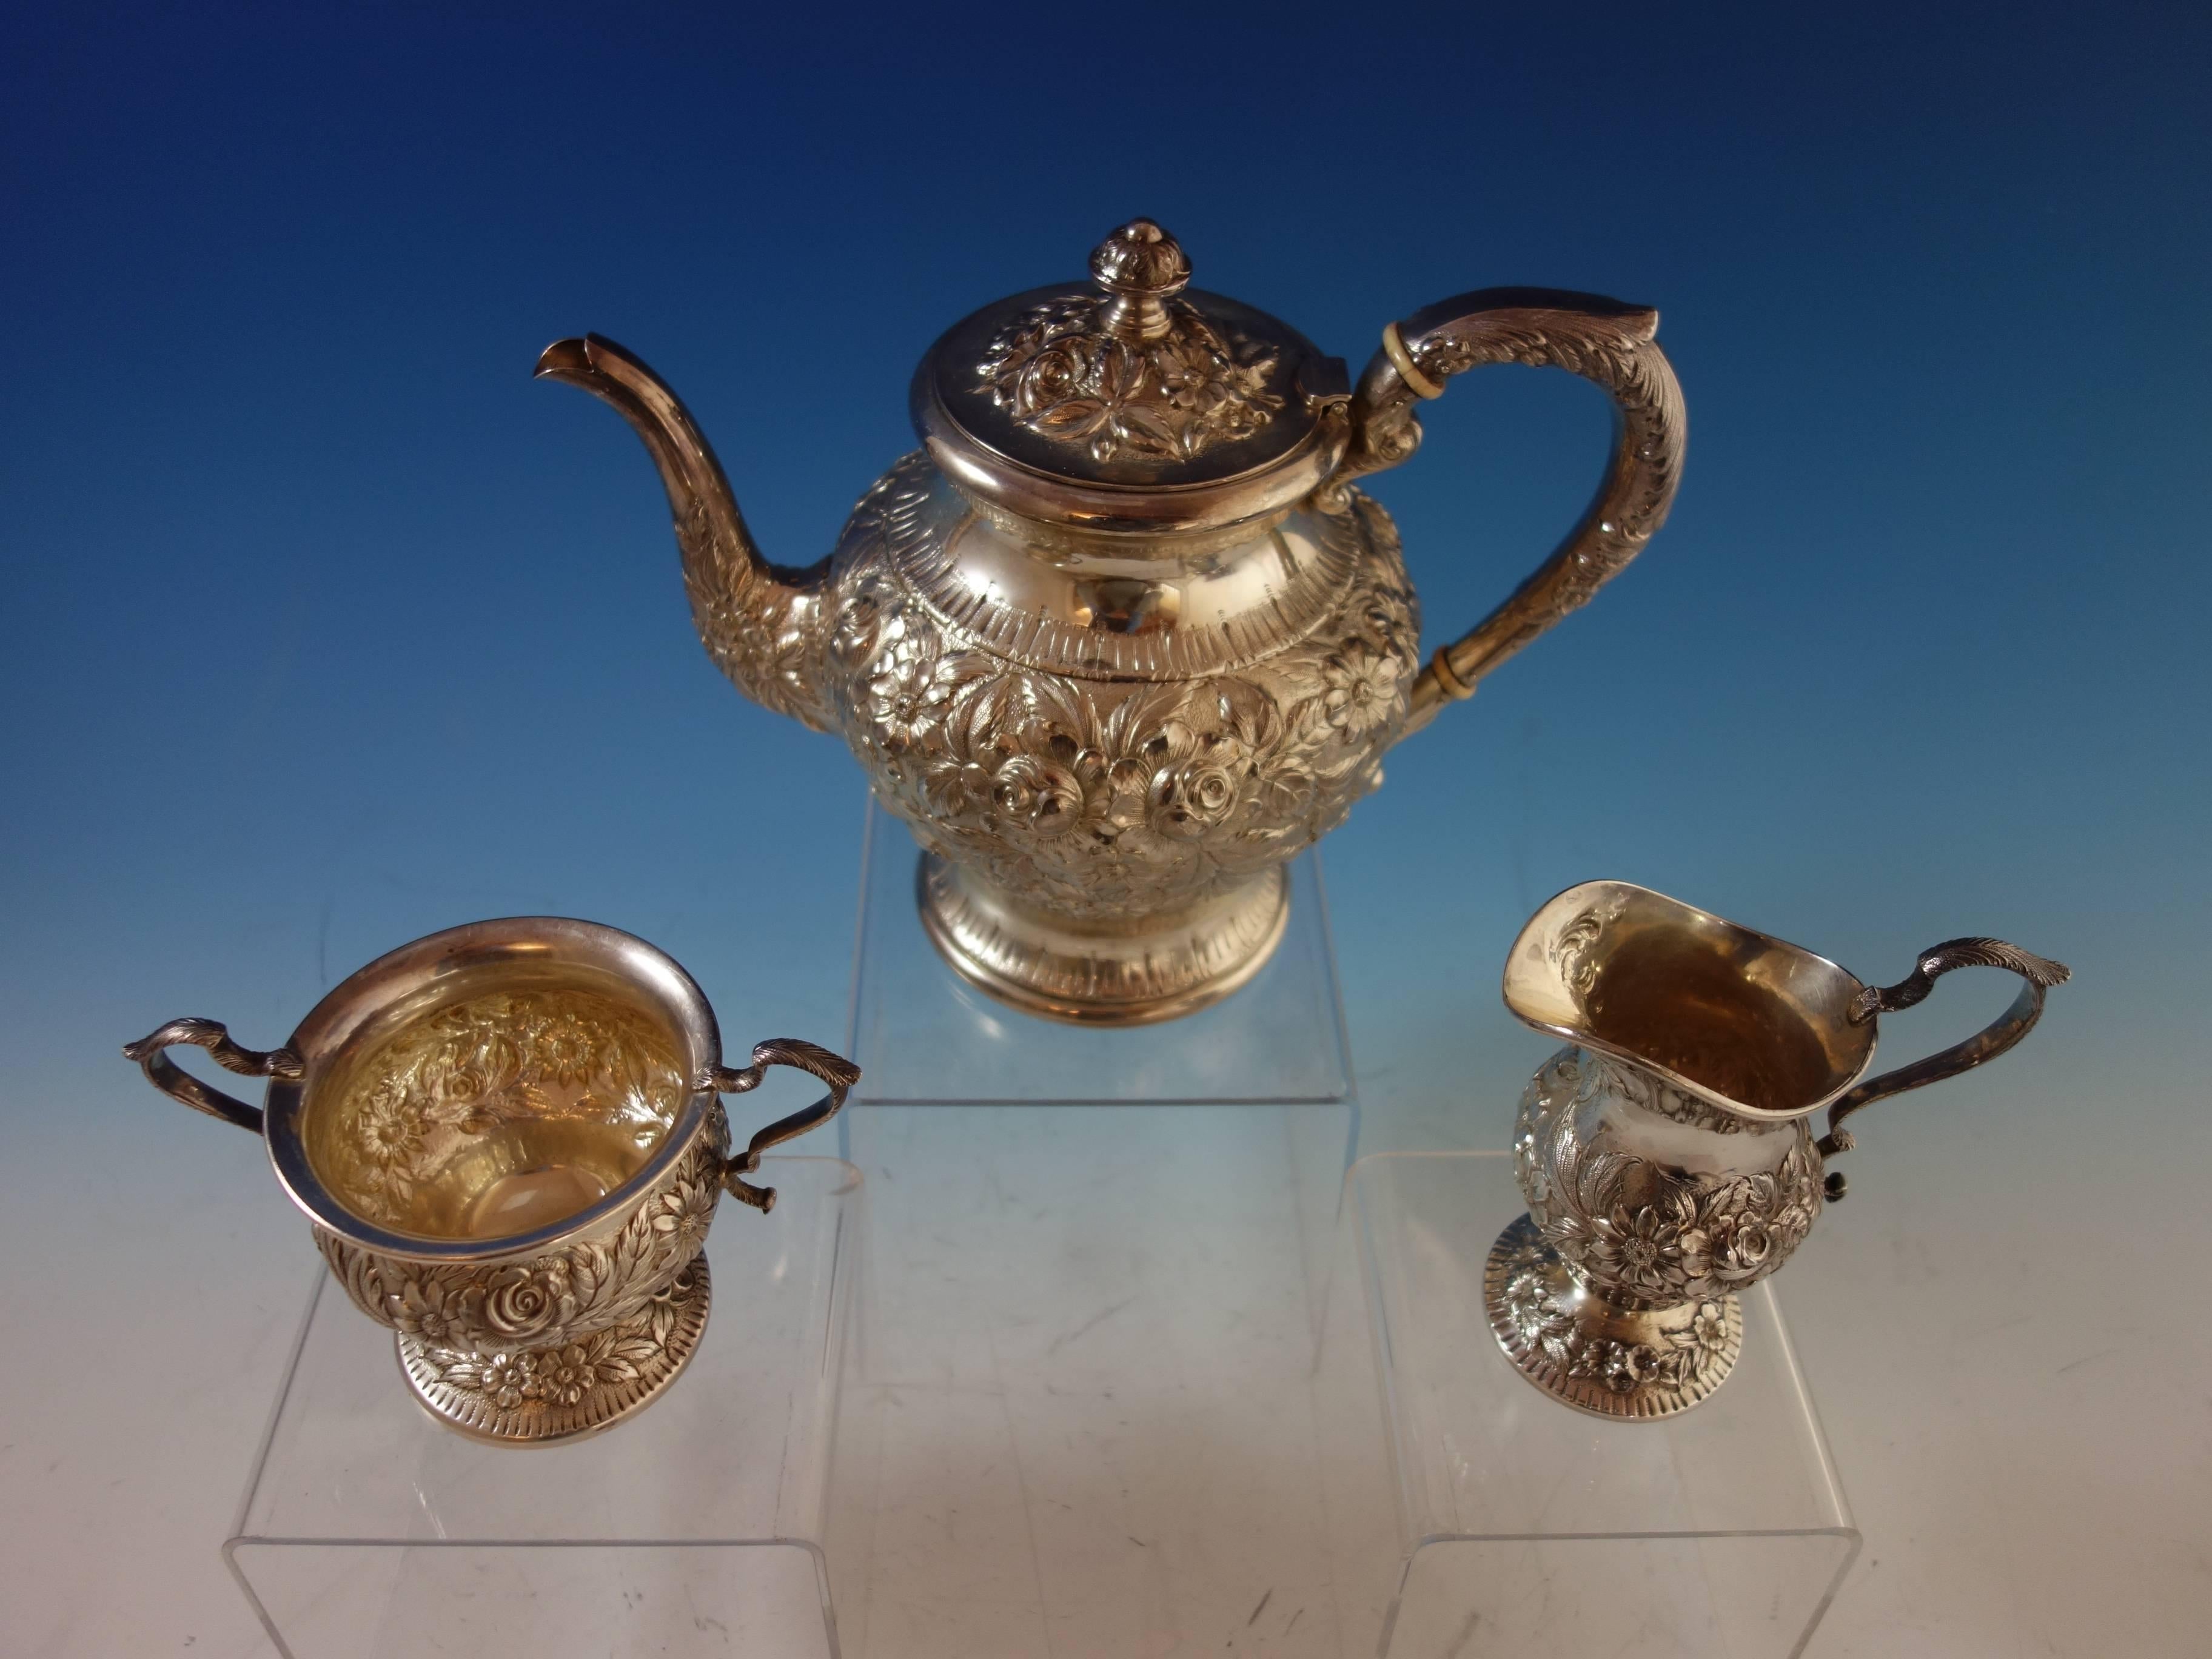 Repousse by Kirk sterling silver tea set all hand decorated. This three-piece tea set includes: 

One coffee pot: Marked #474, measures 9 1/2" x 8", and weighs 22.4 troy ounces. 
One sugar: Marked #184AF, measures 5 1/2" x 4",